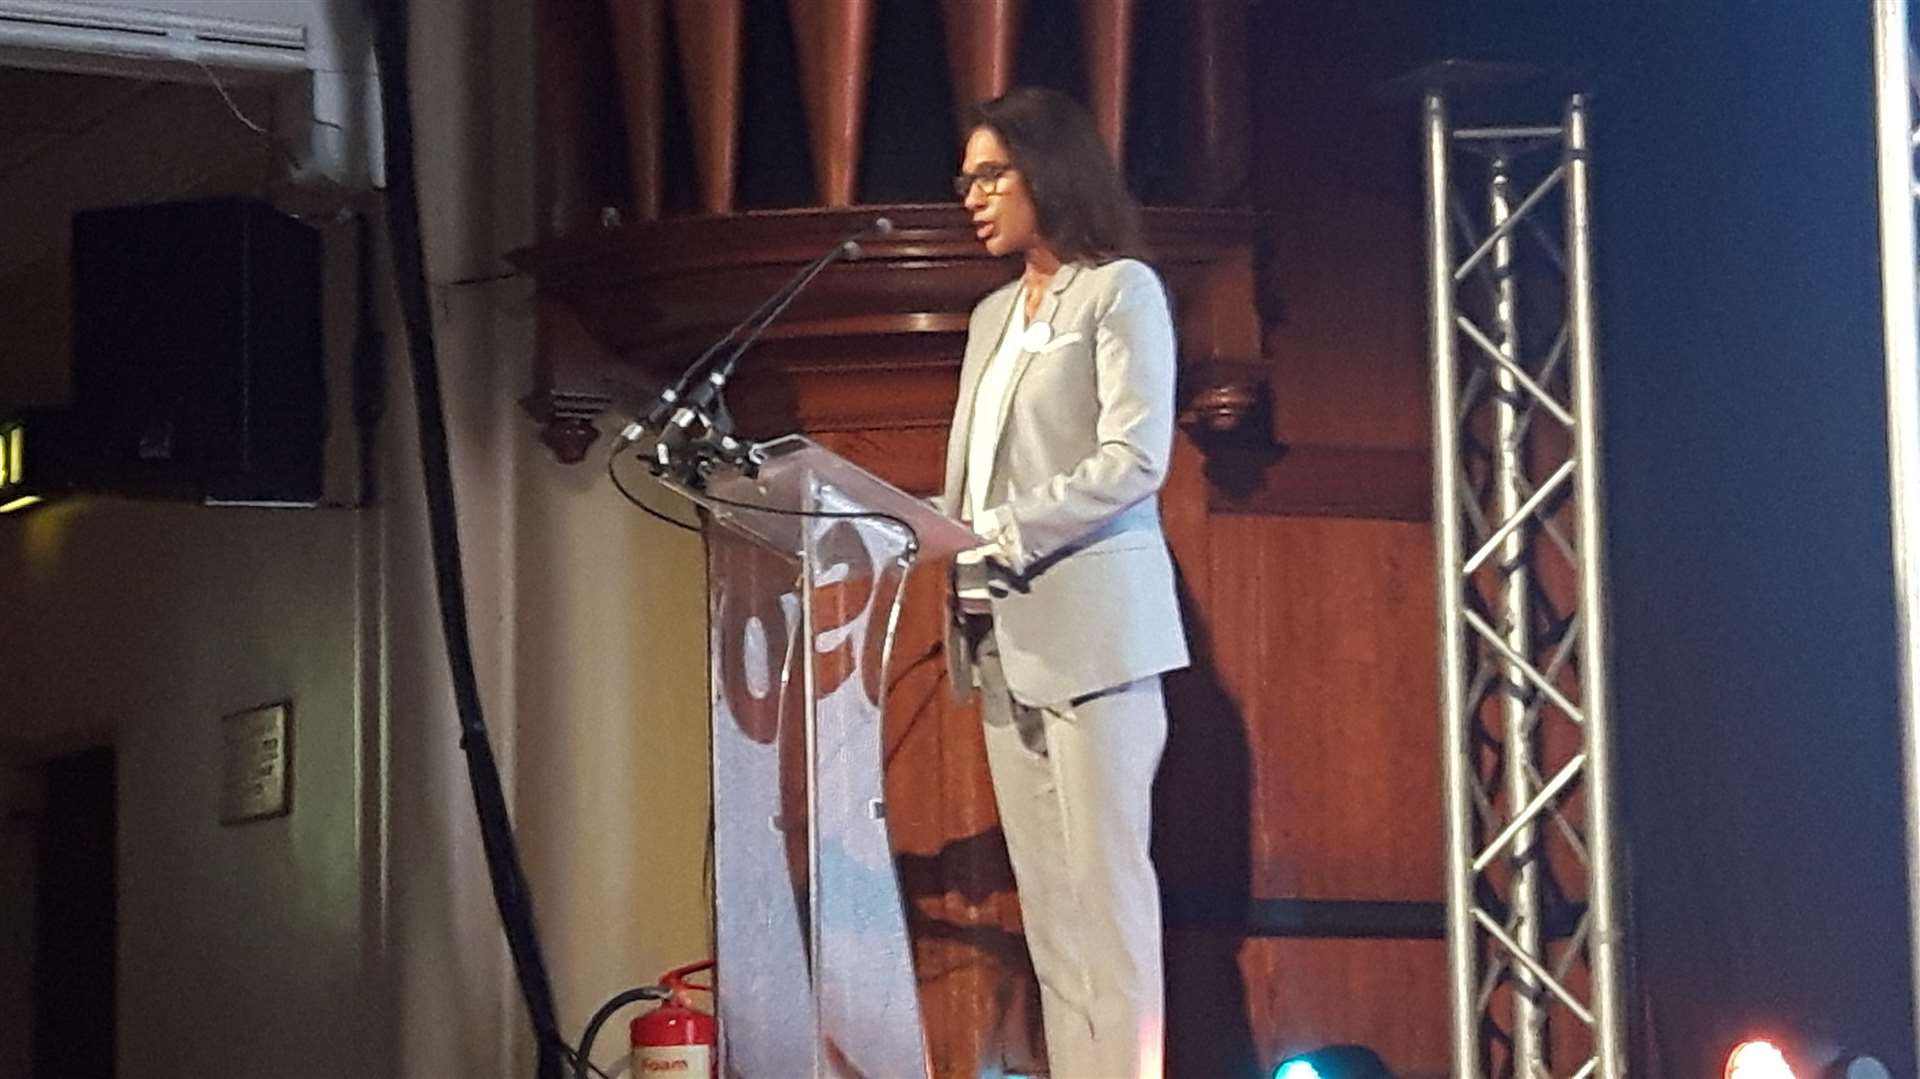 Gina Miller launched her latest Brexit campaign in Dover